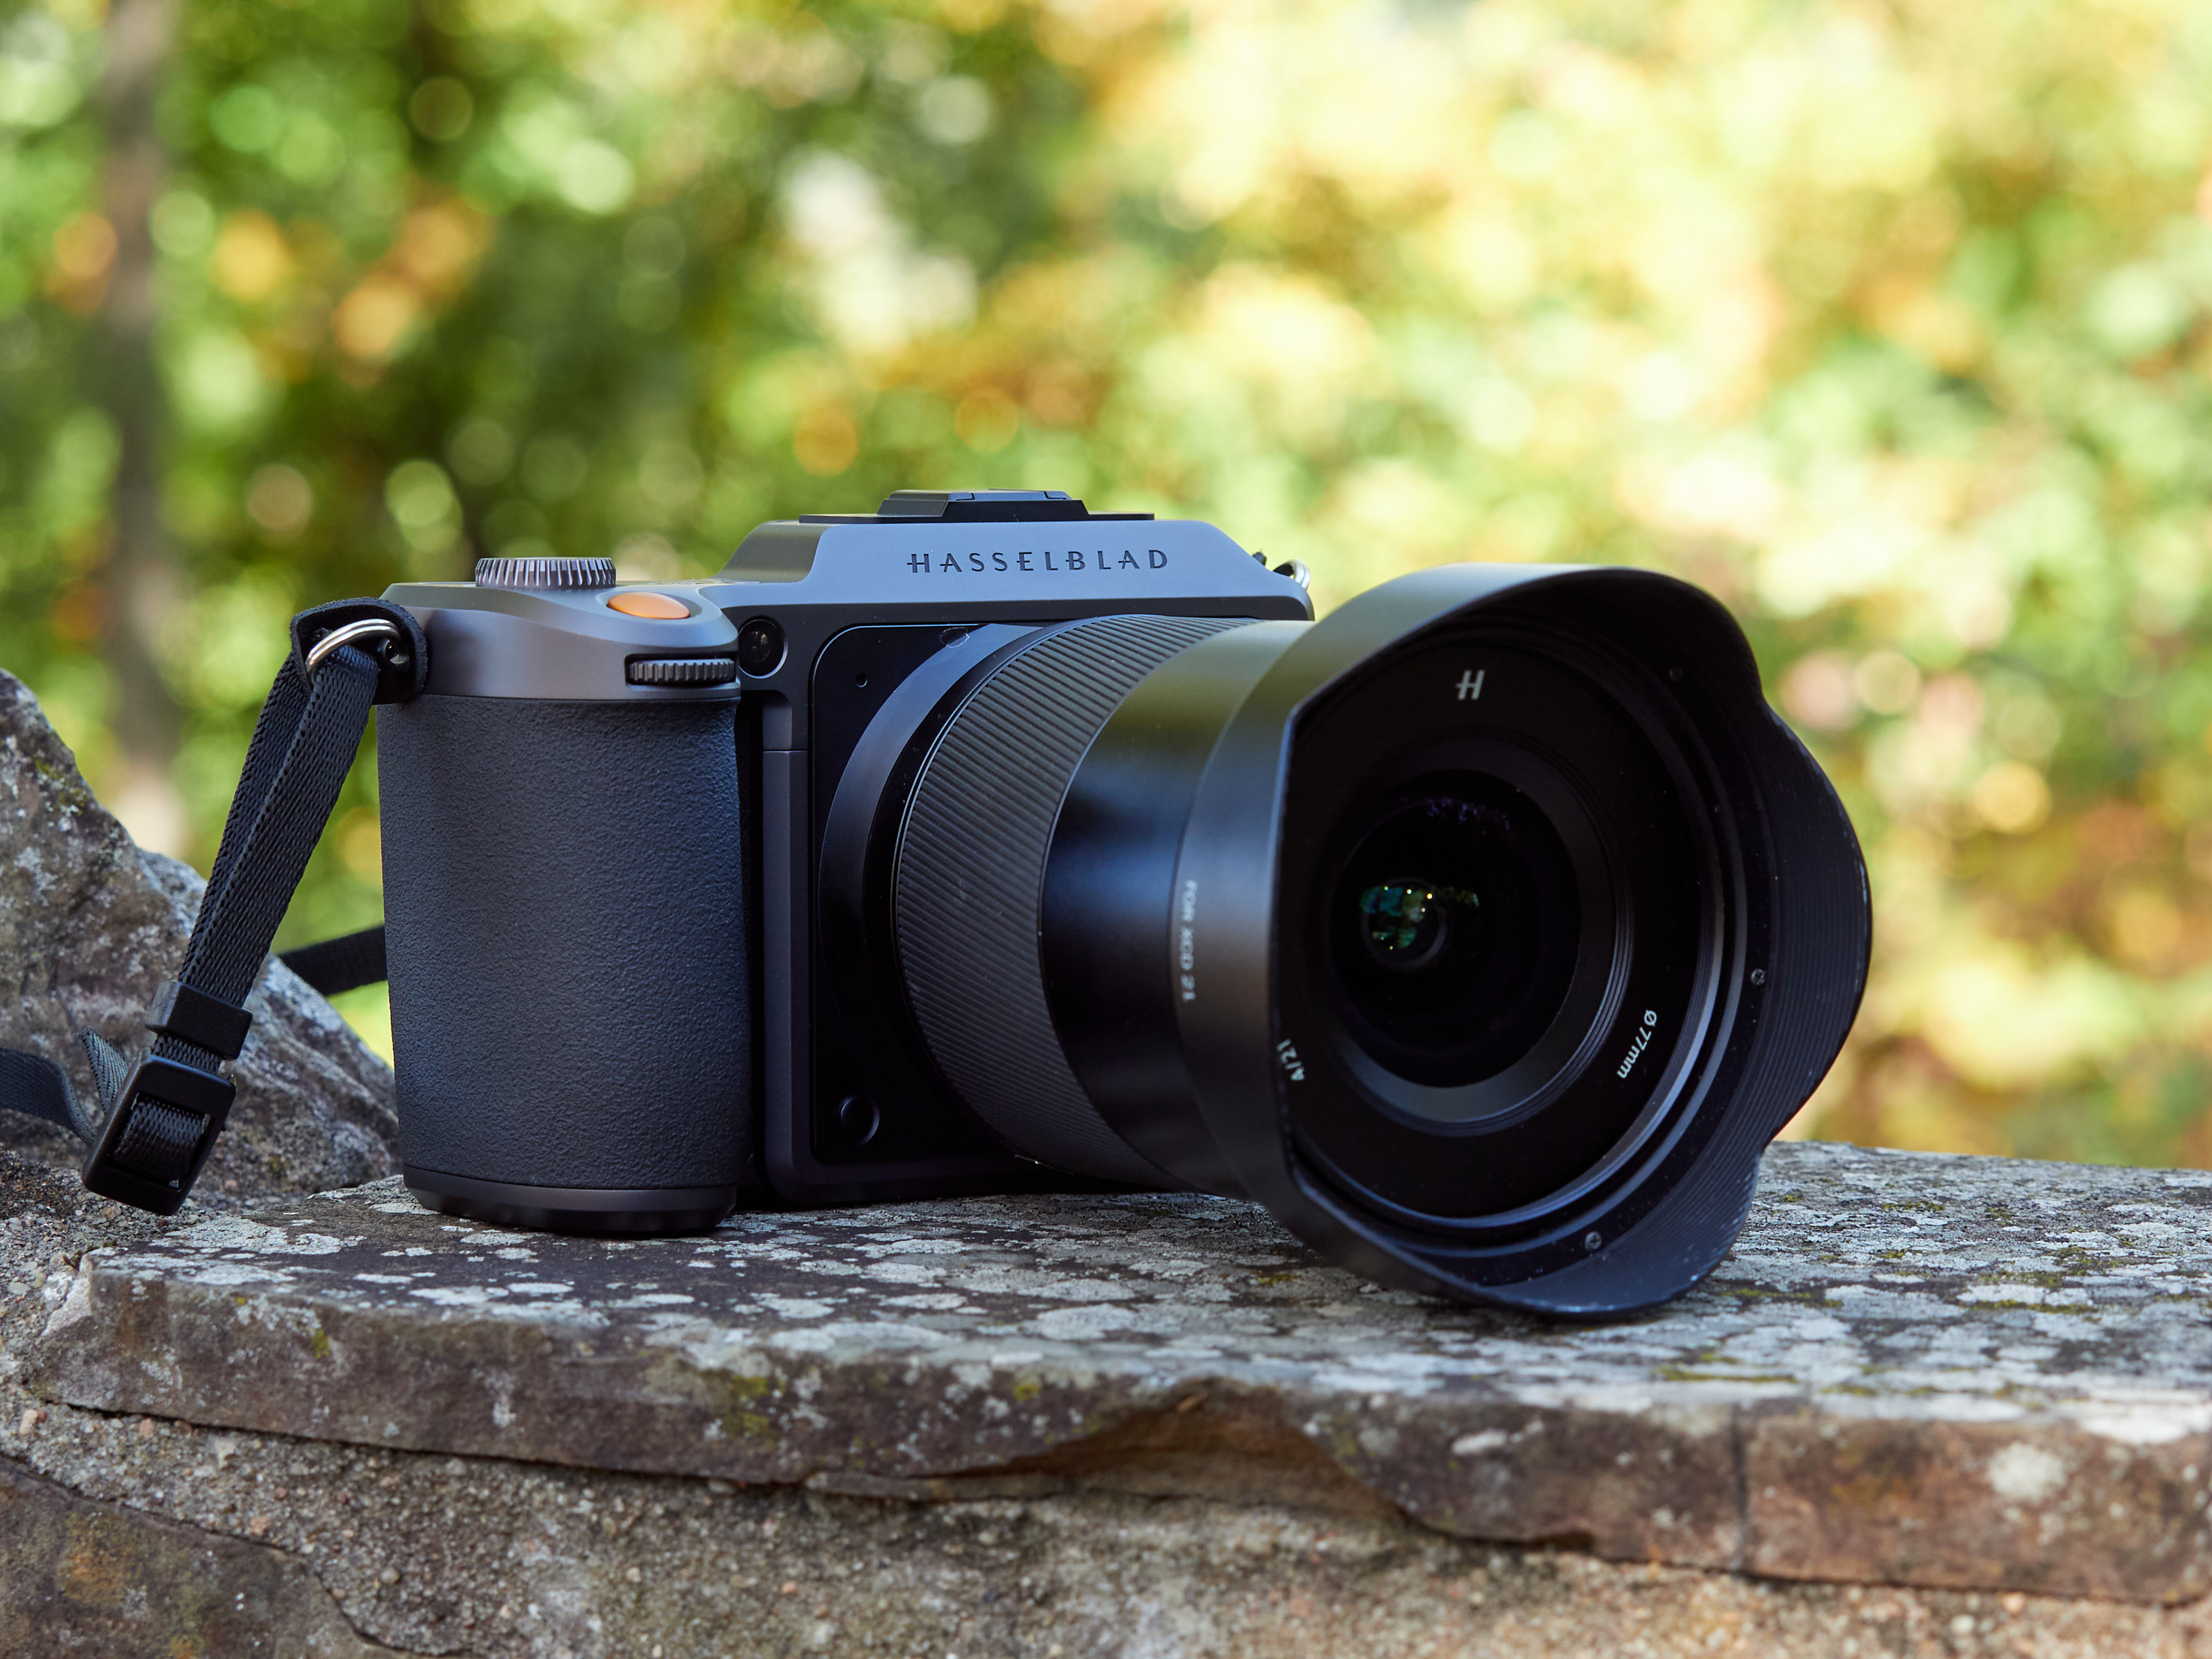 5 Luxurious Cameras That Ooze Quality and Performance